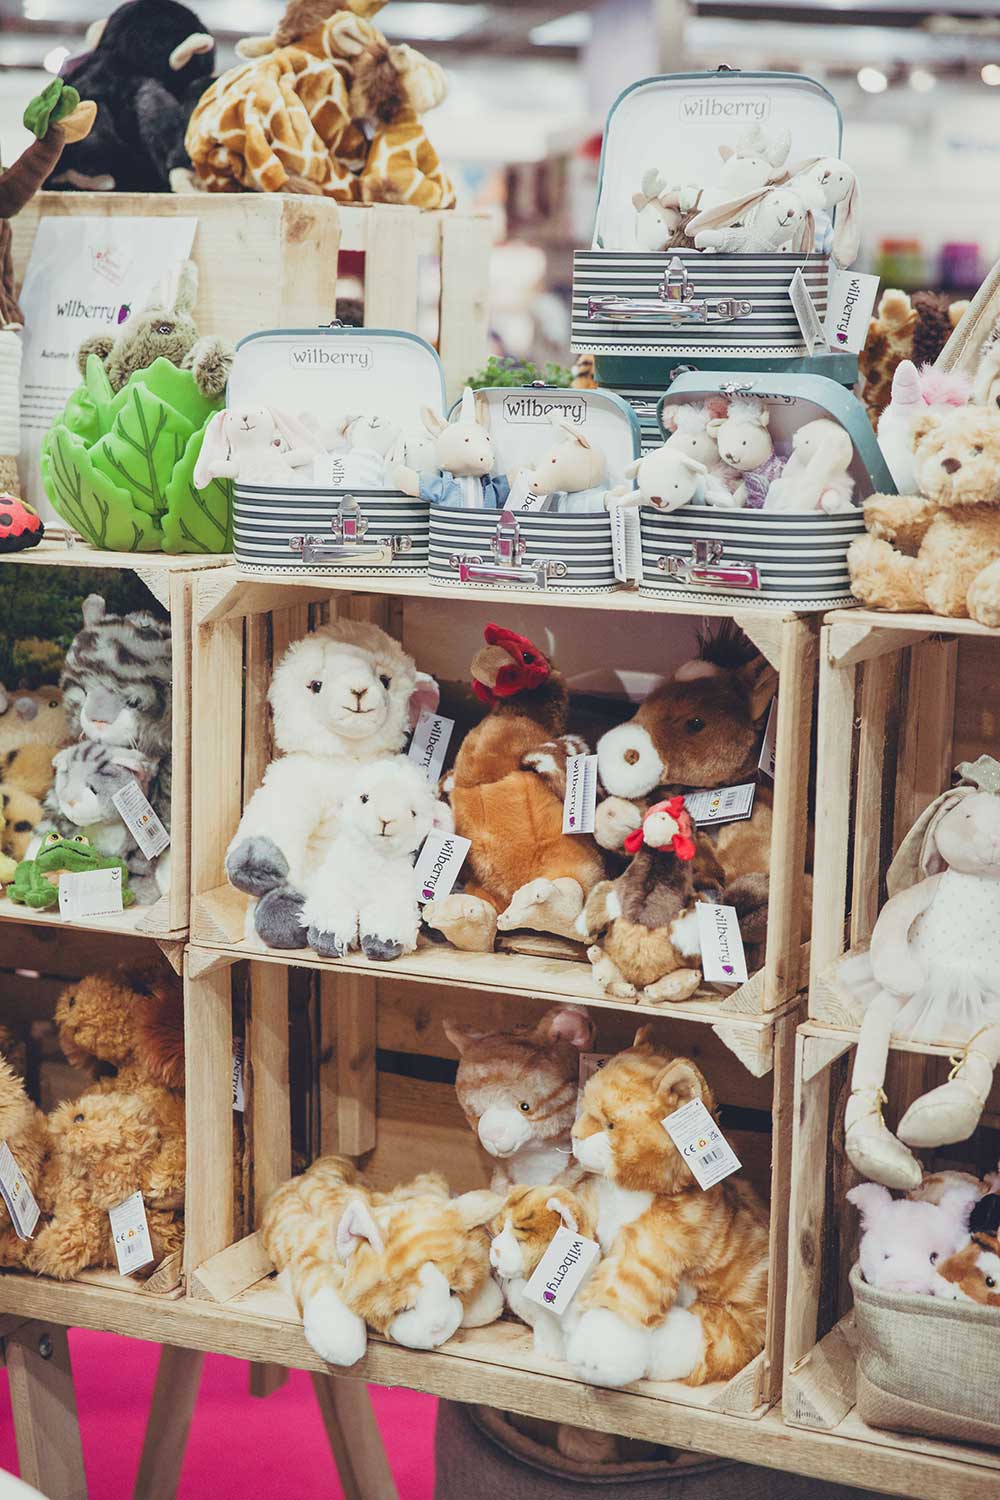 Exhibition stand displaying plush animals toys